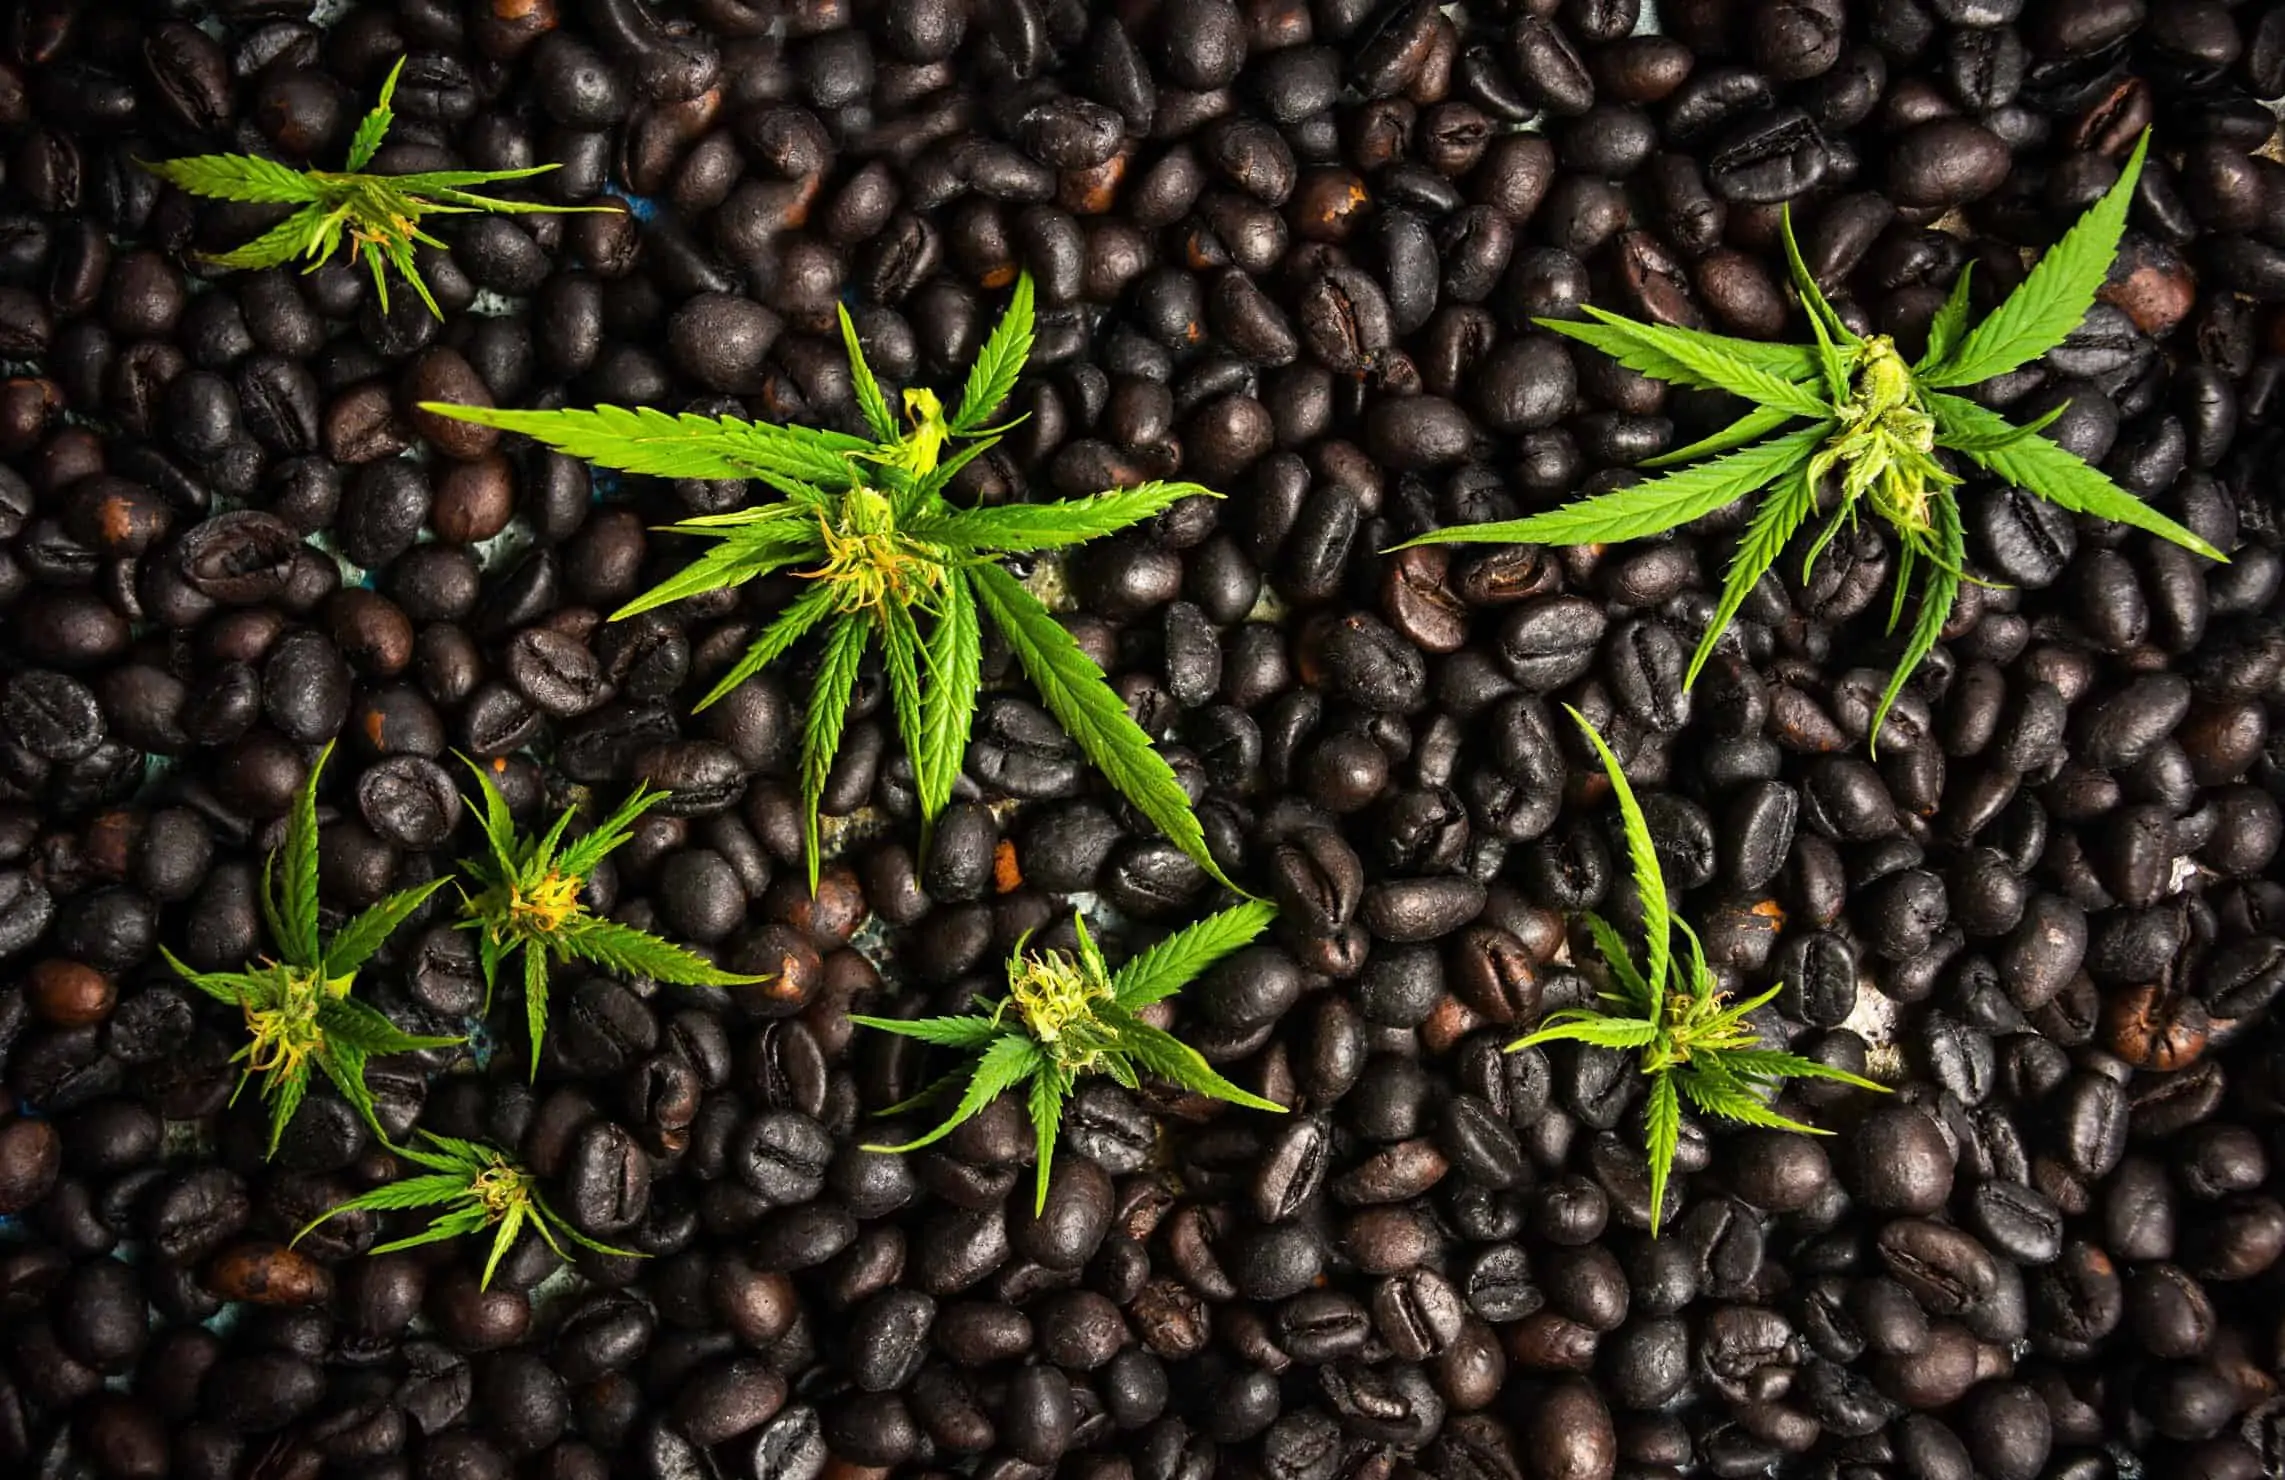 Hemp and coffee will be sent to space via SpaceX